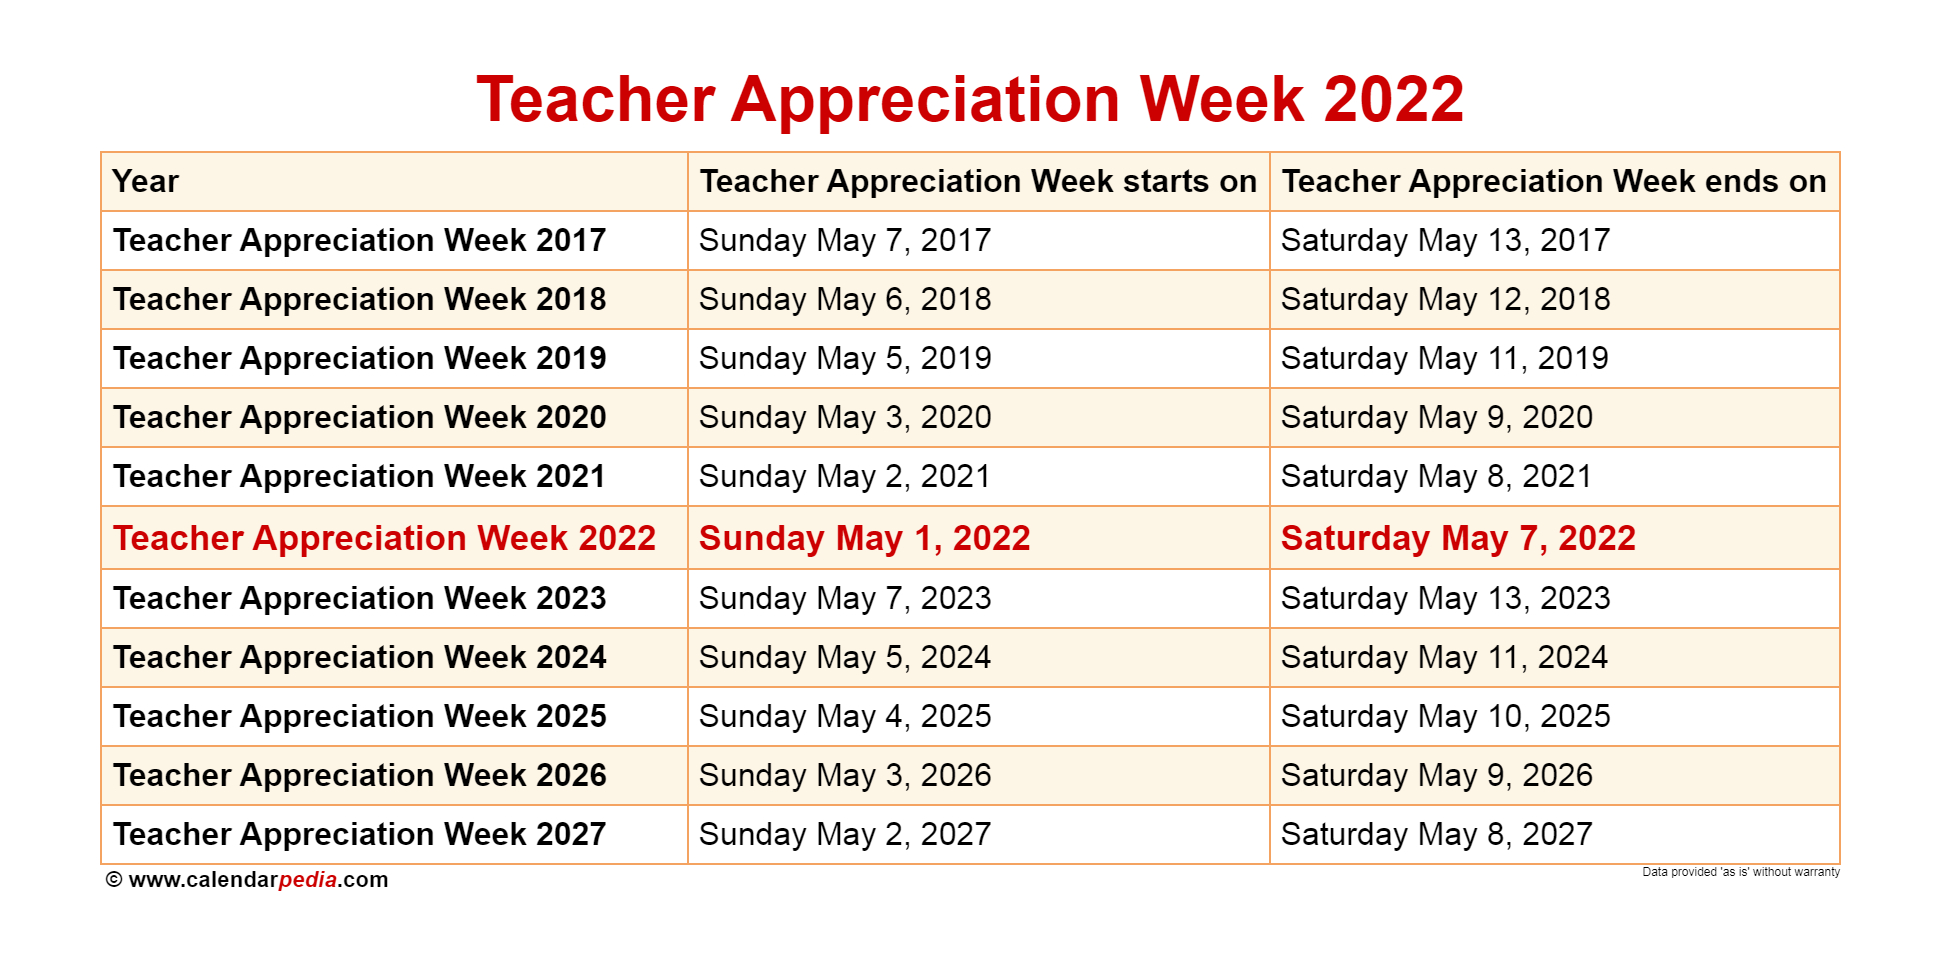 Take Calendar Of Activities May 9 2022 Nle